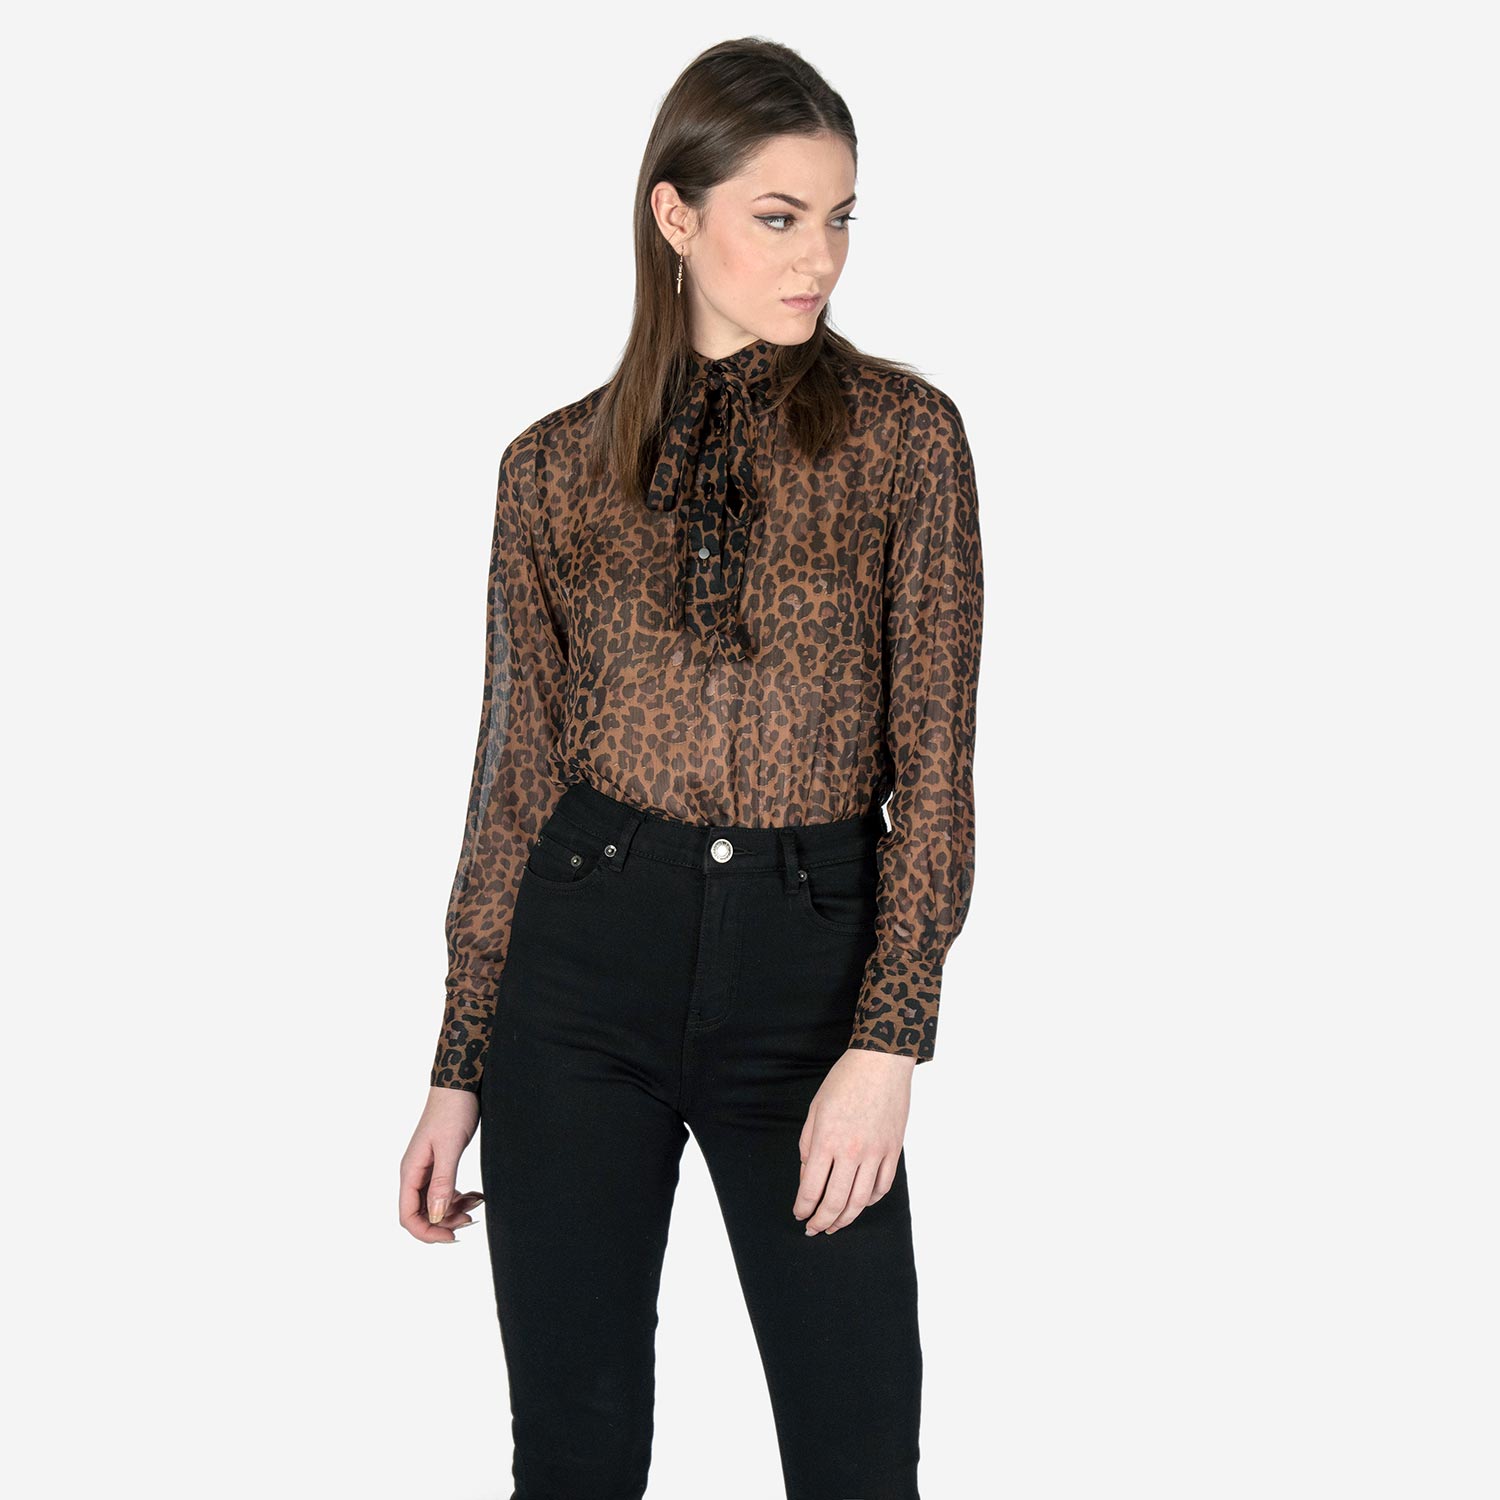 Victoria - Leopard Print Top with Bow | Straight To Hell Apparel